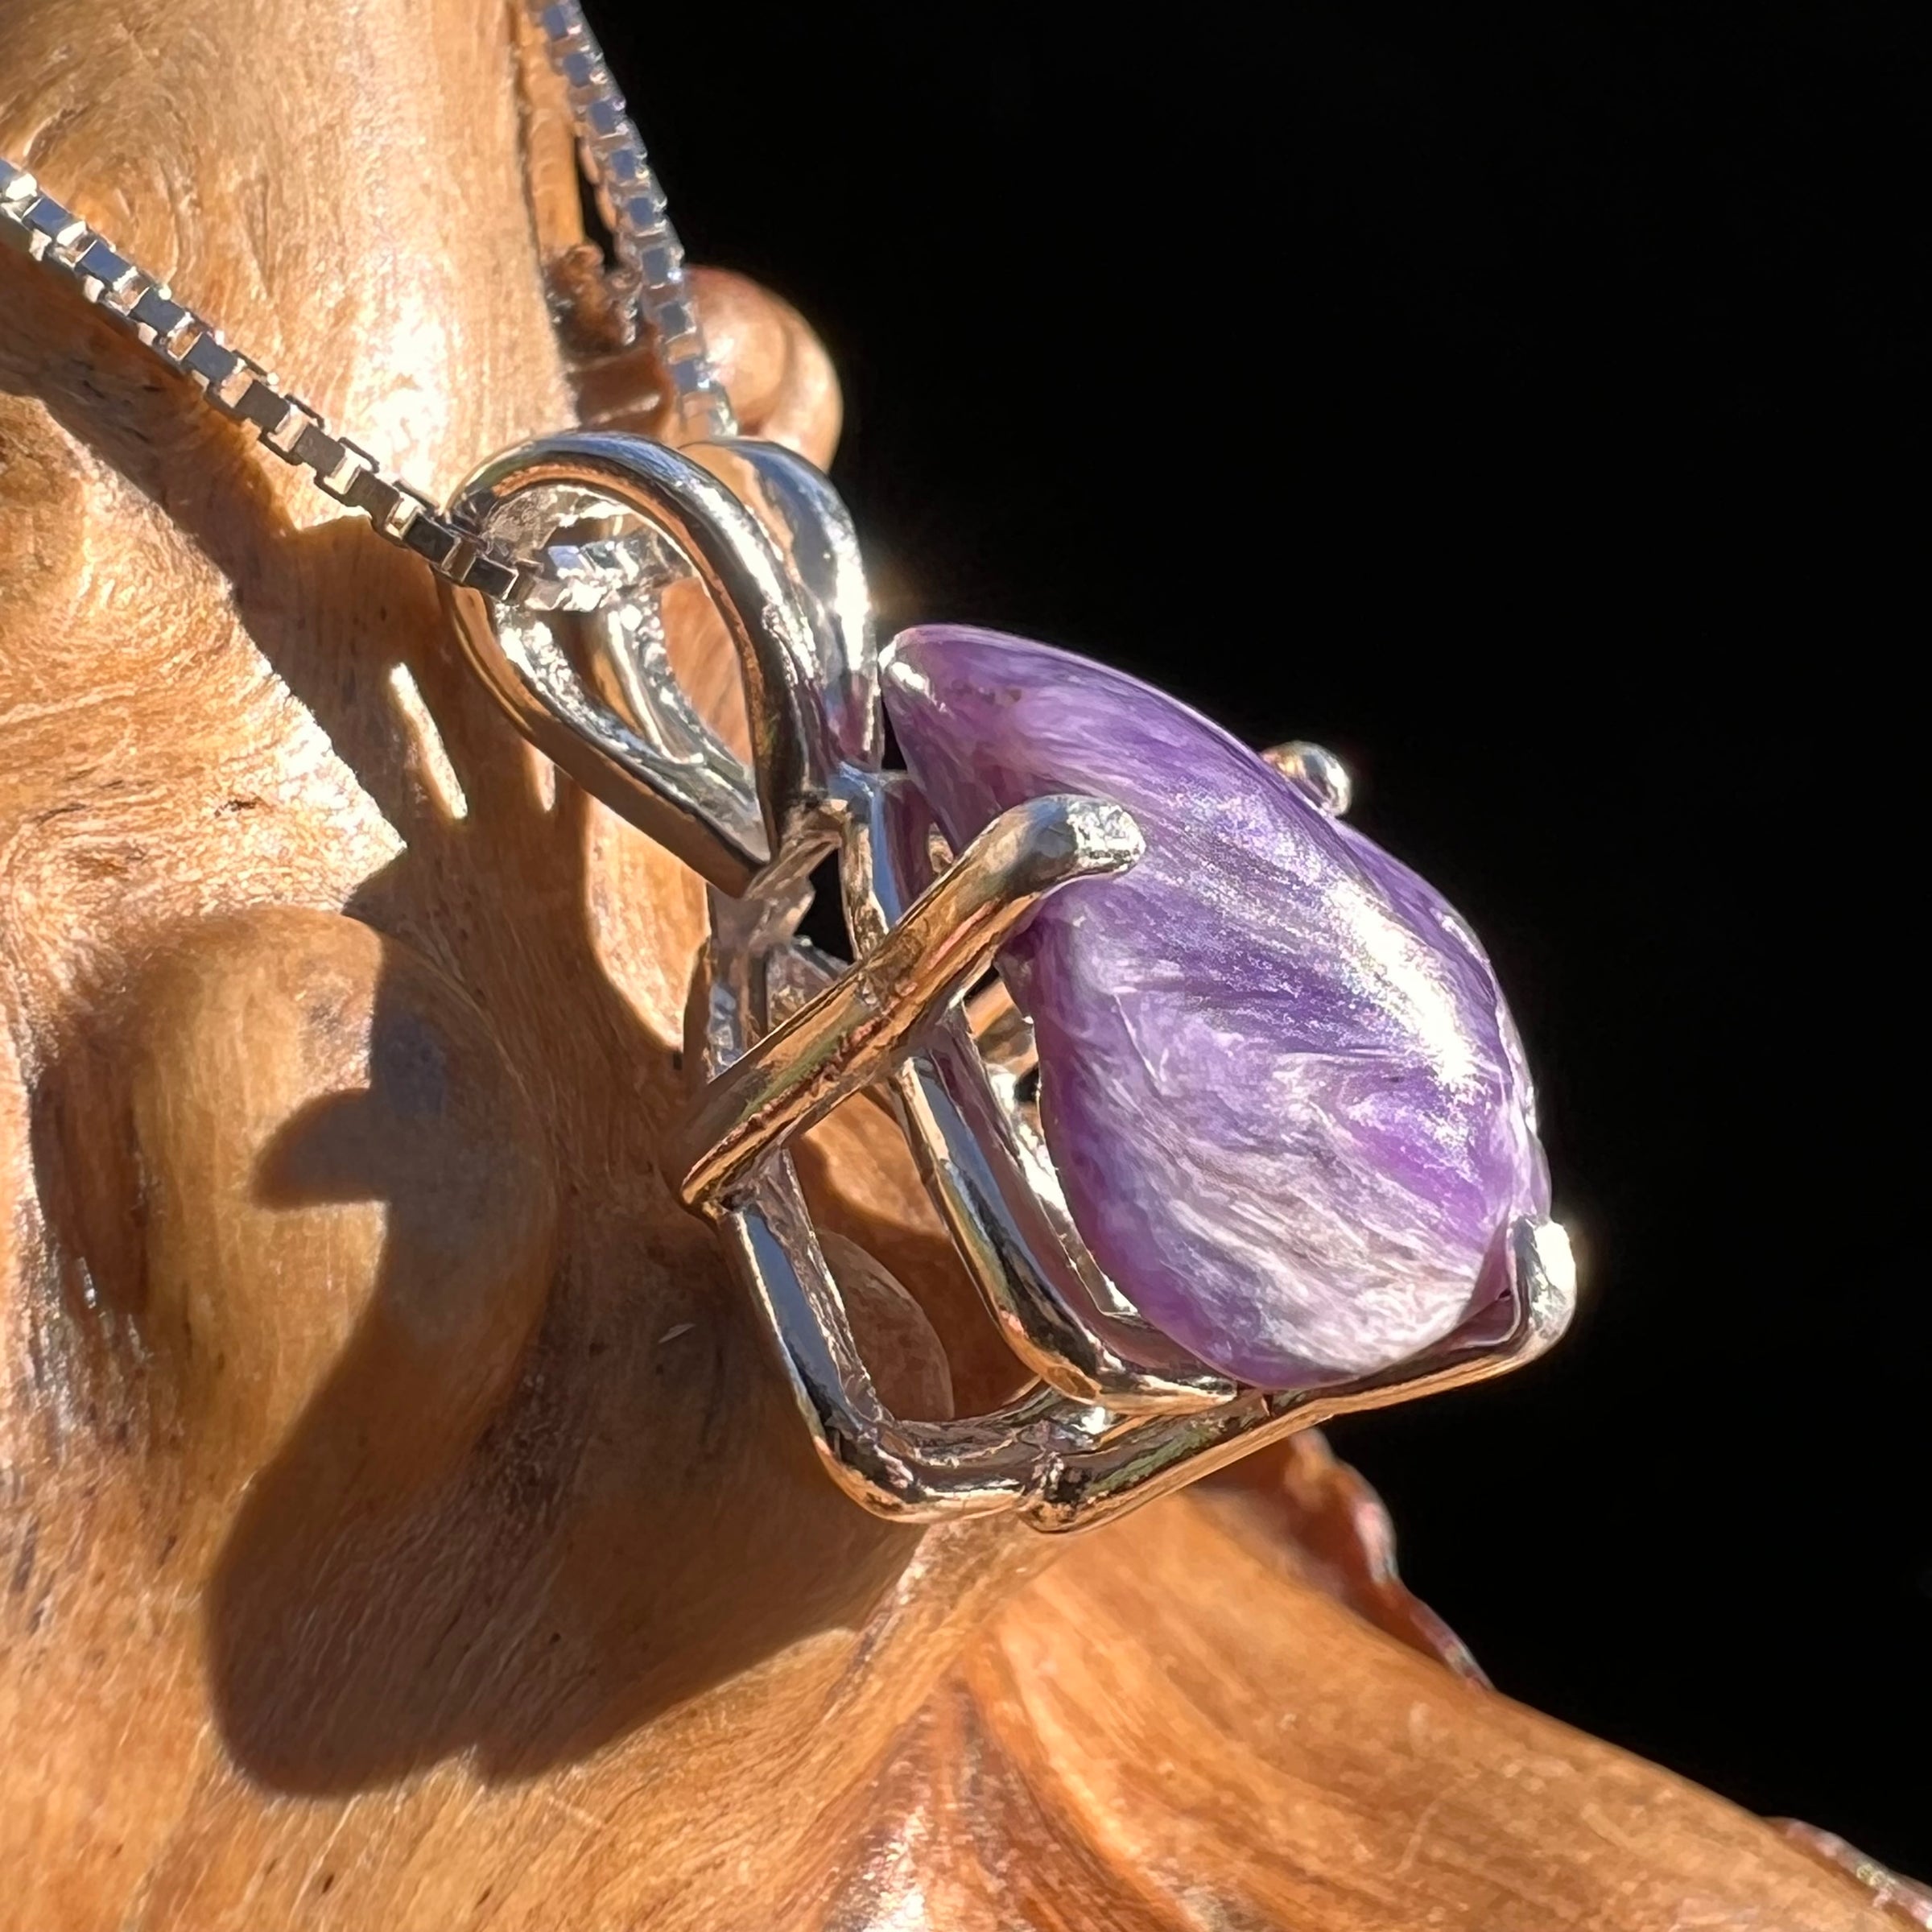 Charoite Necklace Sterling Silver #3903